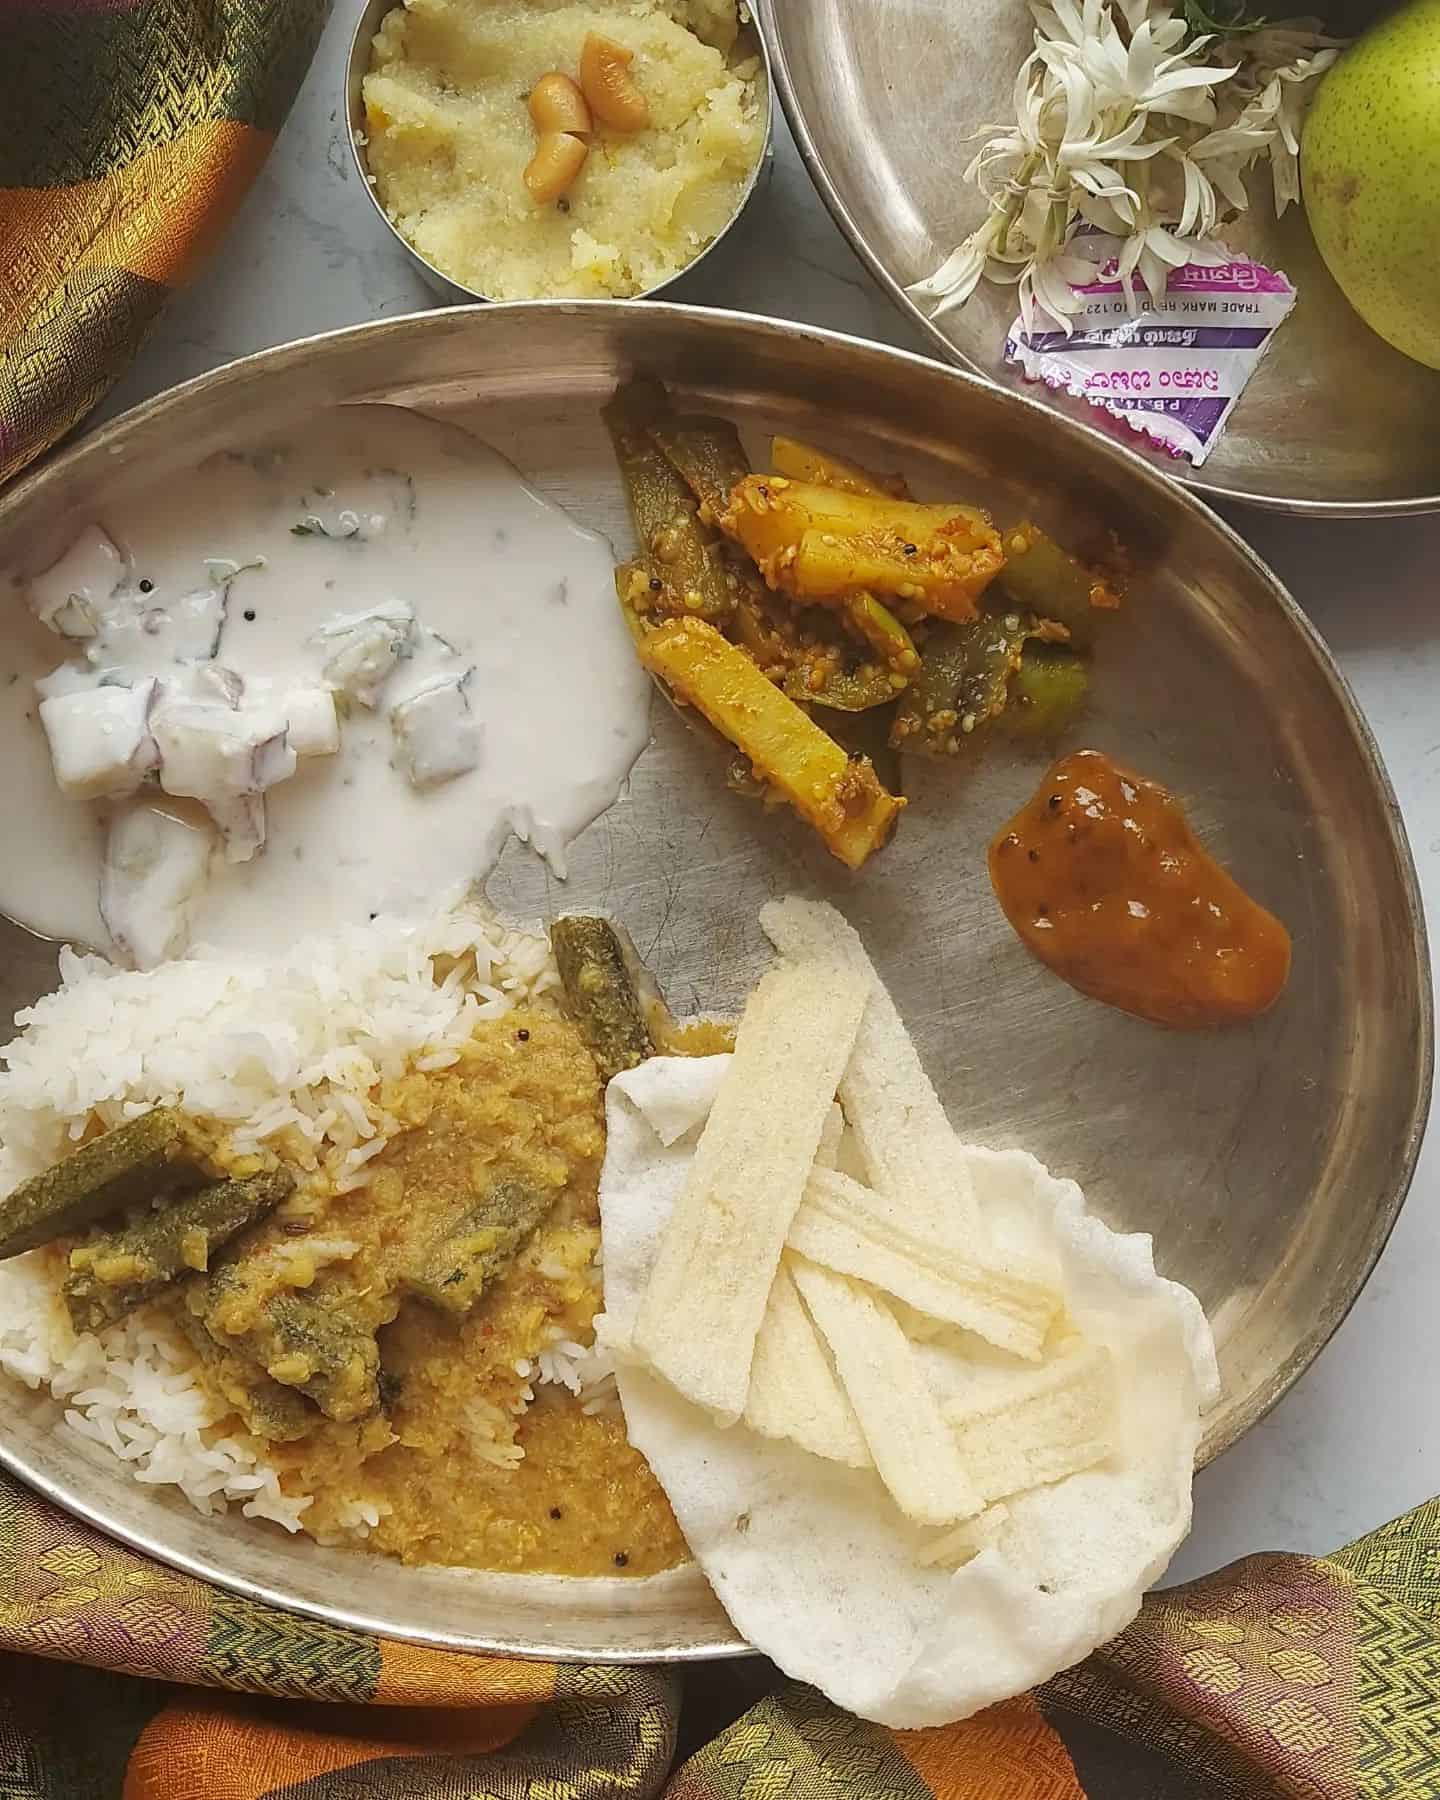 Eid Mubarak and happy akshaya tritiya to those who celebrate either of the (why not both 🙂) 

 Festival meal can mean only one thing for us - a slightly elaborate lunch (call it brunch 😜) from dishes across the two states :) 

#onmyplate with - 

🌸 Sadam - nei- vedakkai arichivita sambhar (rice - ghee - okra sambhar with fresh ground paste)
🌸 Katrikkai urulai podi curry (brinjal and potato dry saute with vangibhath masala, Mysore style ☺️)
🌸 Mangai pachadi (needs no introduction - tangy spicy mango relish)
🌸 Swet potato ginger raita (the Tamil name is tooooo long 😜😜)
🌸 Arisi applam from @srivarahafoods and kuchi vadam from @mylaporekitchens 
🌸 Karnataka style balehannu sajjige. (banana sheera / halwa, Udupi style)
🌸 Curd / buttermilk (nip)

👉👉 Follow @sizzlingtastebuds for more healthy, homemade meals 
👉👉 All recipes are on the blog,  DM if you need any further information

And now to begin the 2nd half of the day ,but first that quick snooze 😴 . Have a great day folks !

#sizzlingtastebuds #minimealsbysizzlingtastebuds #festivalthali #akshayatritiya #engaathuthaligai #thaligai #thali #meals #mealsforfestivals #noonionnogarlic #southindianvegetarian #vegetarianfood #southindianfood #vegetarian #indianthali #indianmeal #mumbaiblogger #yummy #instafood #instayum #instathali